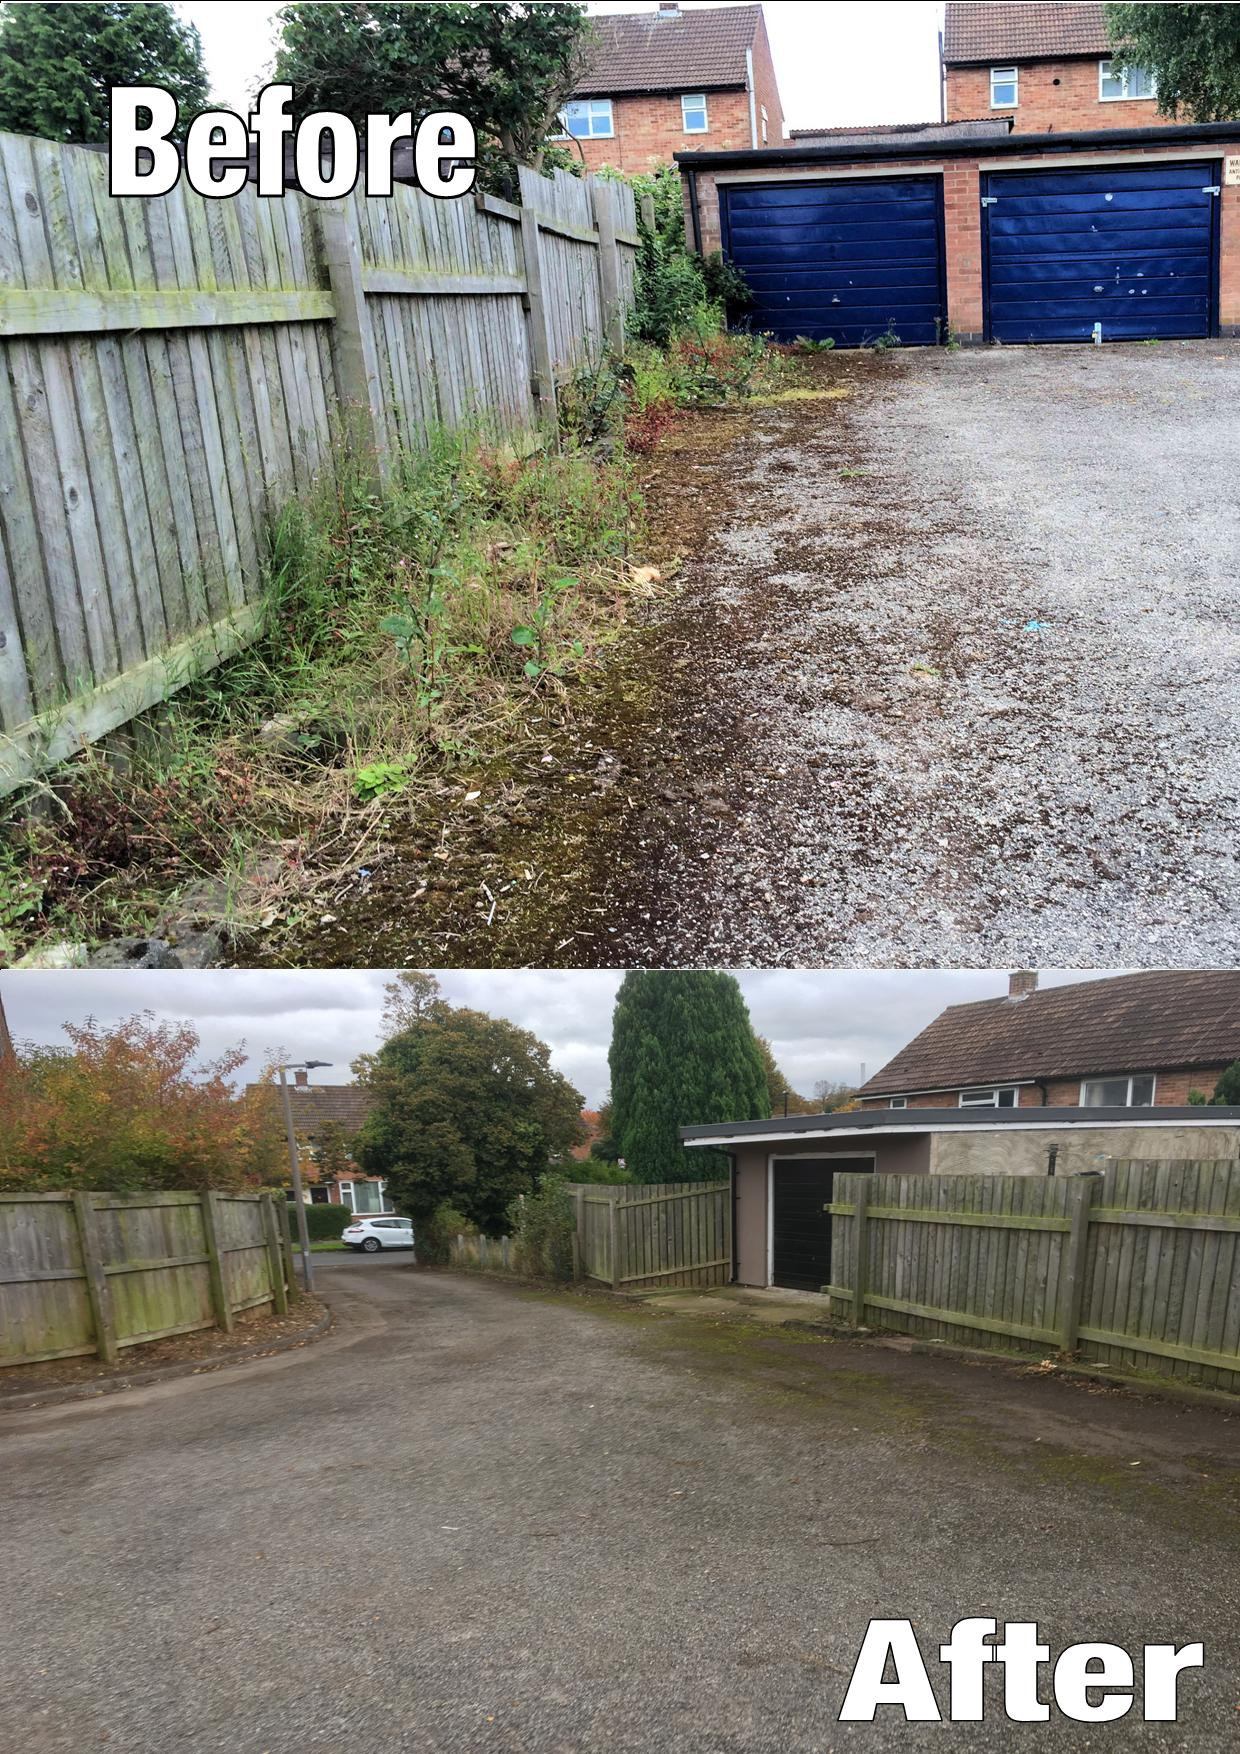 We were delighted to see that the Marston Avenue garage area had finally been tidied up over 12 months after we had first reported problems